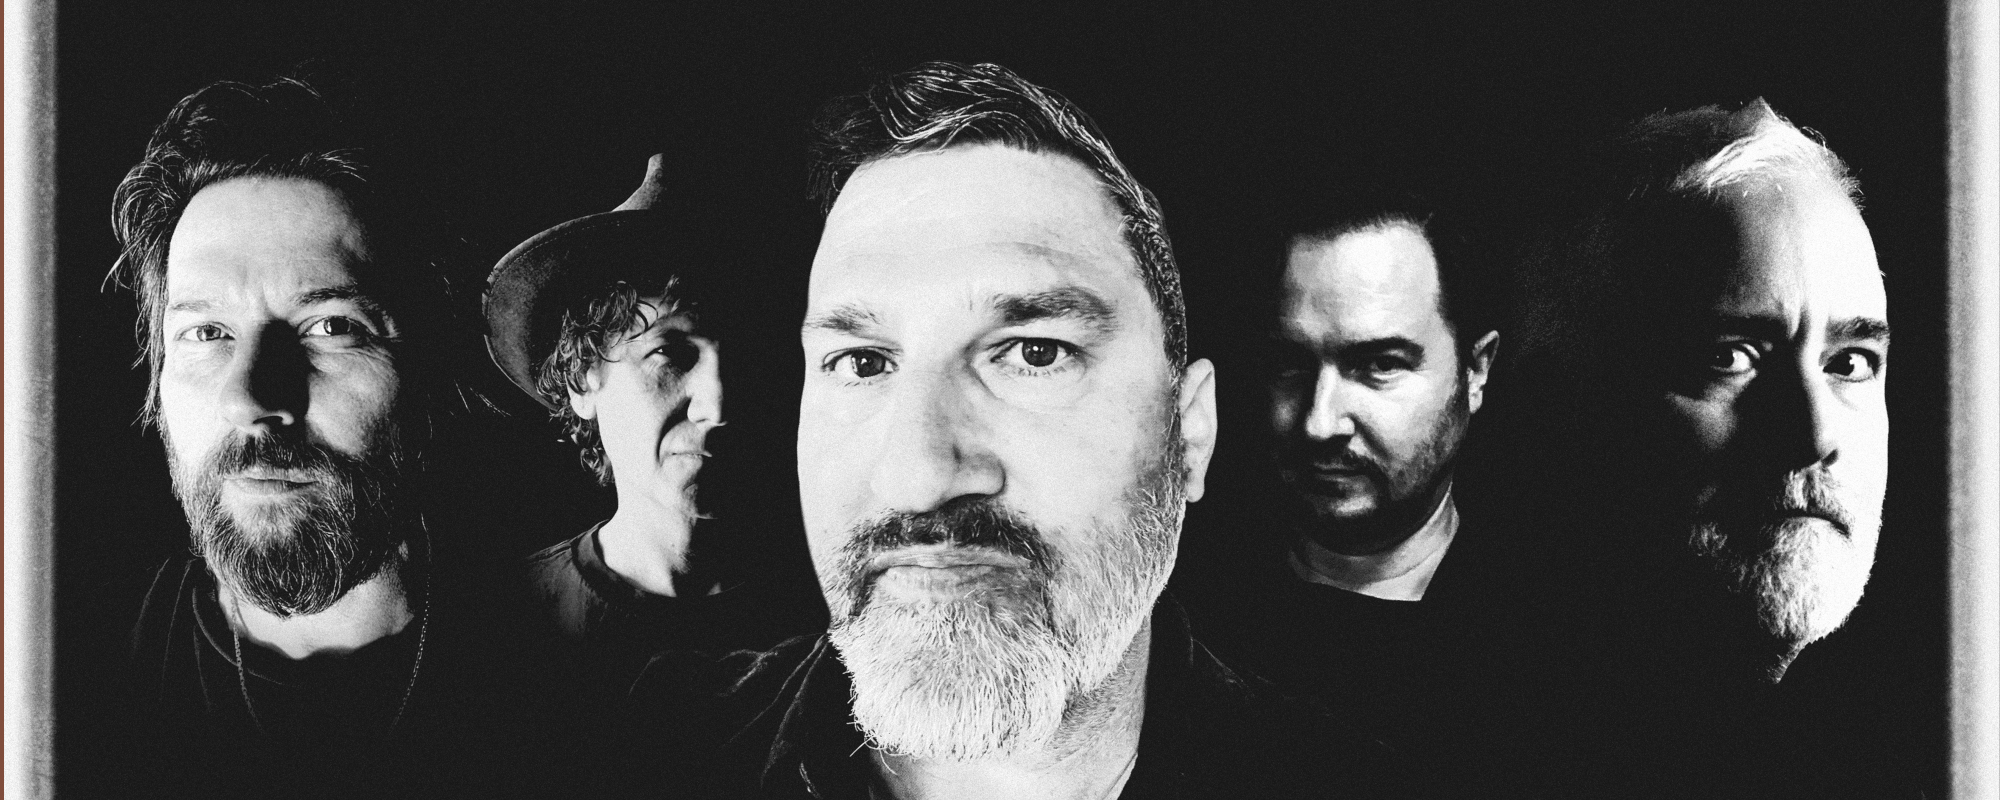 Afghan Whigs’ Greg Dulli Talks the Making of ‘How Do You Burn?’ and the Loss of Mark Lanegan